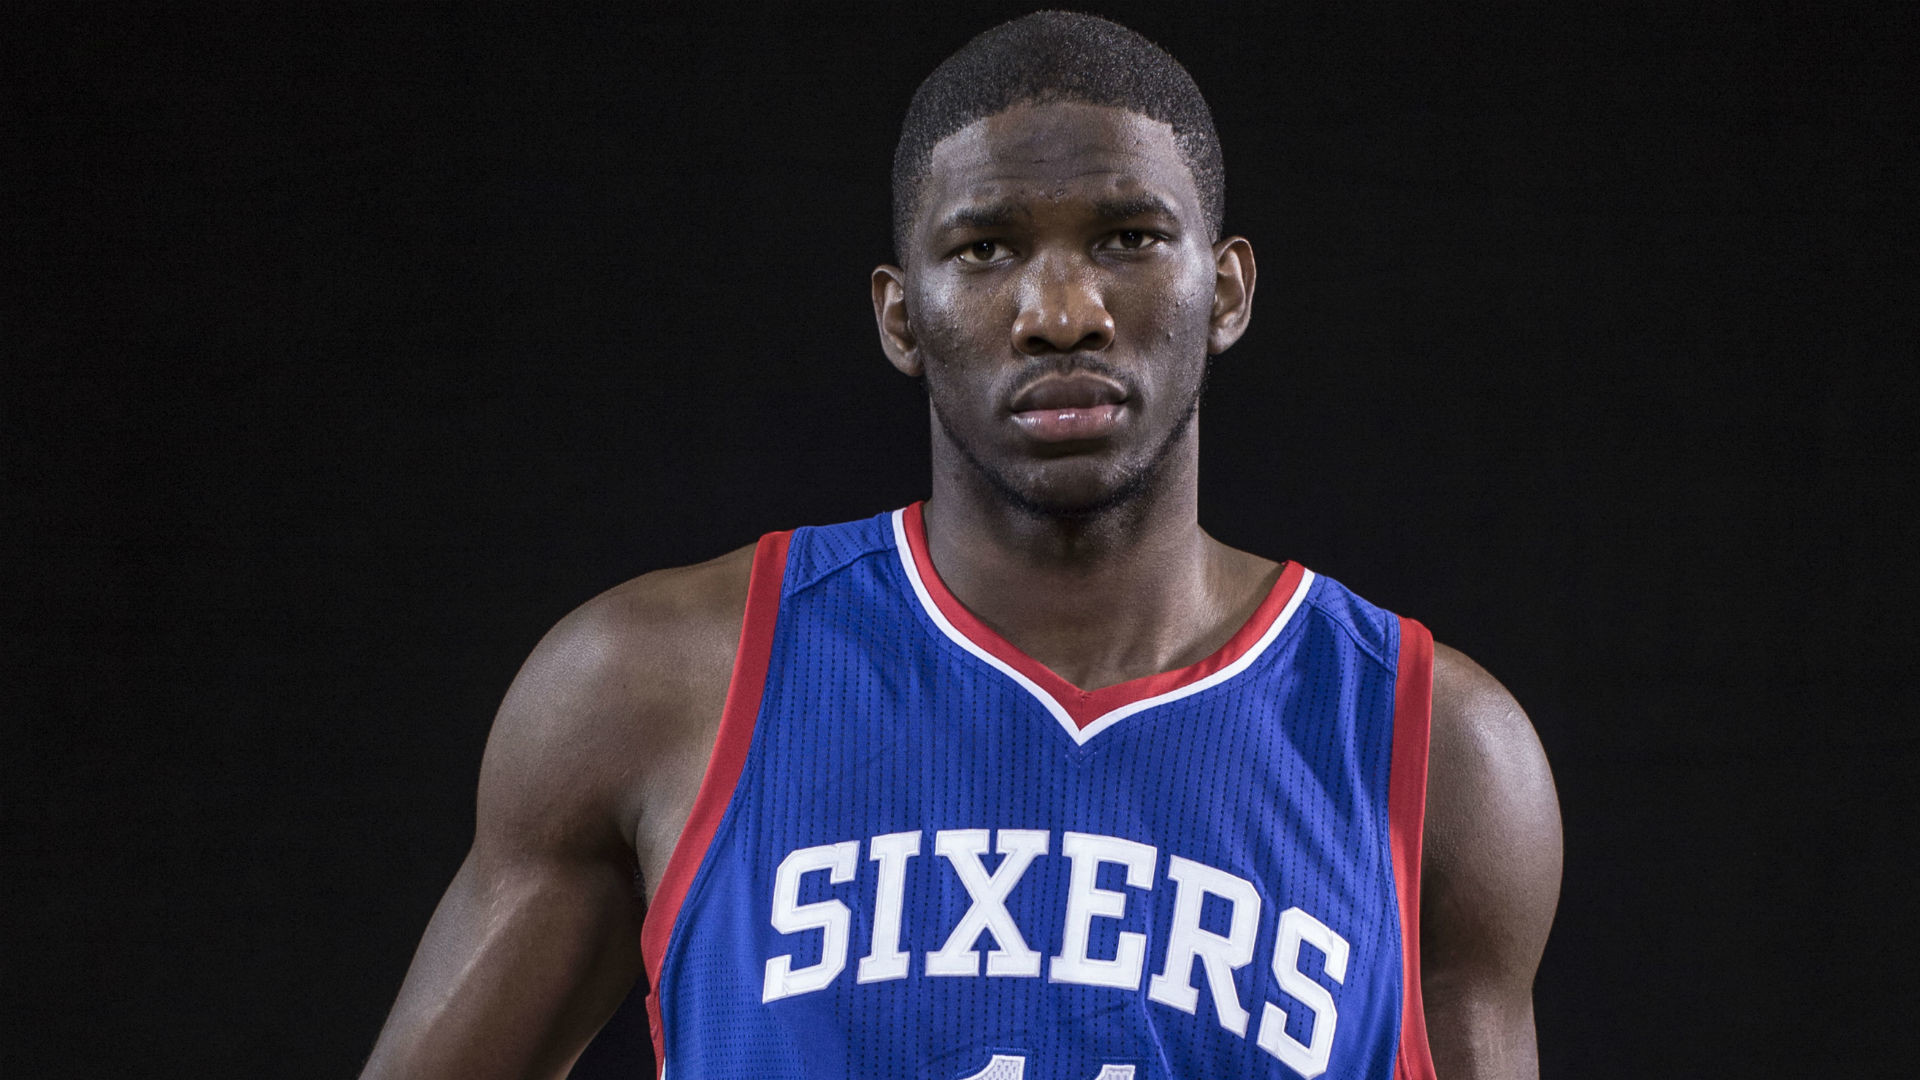 1920x1080 Joel Embiid suffers setback, could alter Sixers draft plans | NBA |  Sporting News